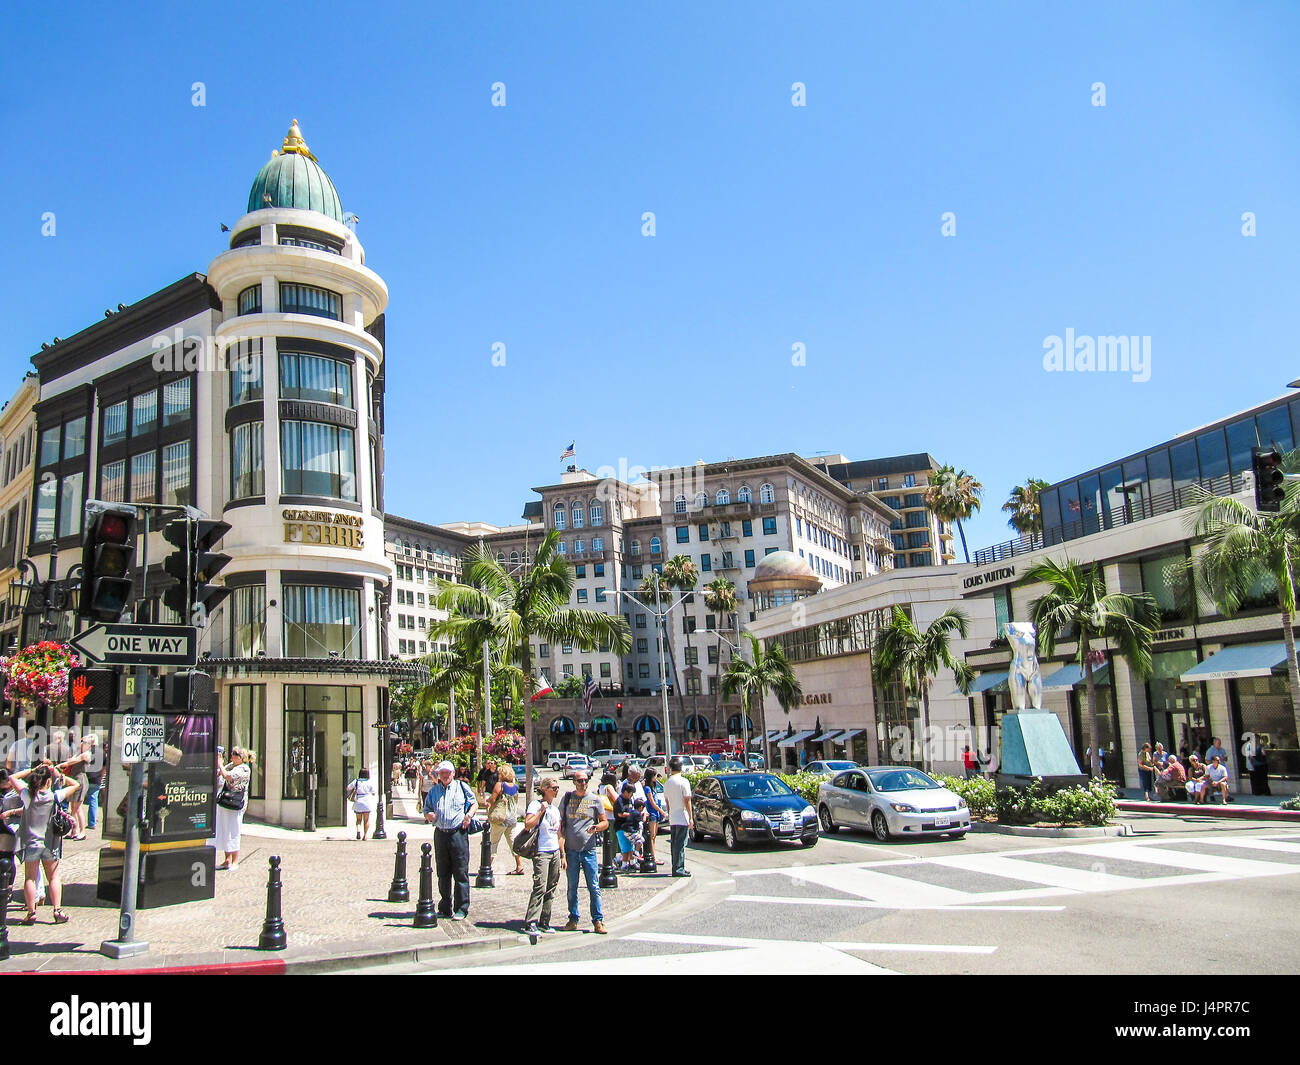 Los Angeles, USA - May 25, 2010: Rodeo drive with people, stores and road with cars Stock Photo